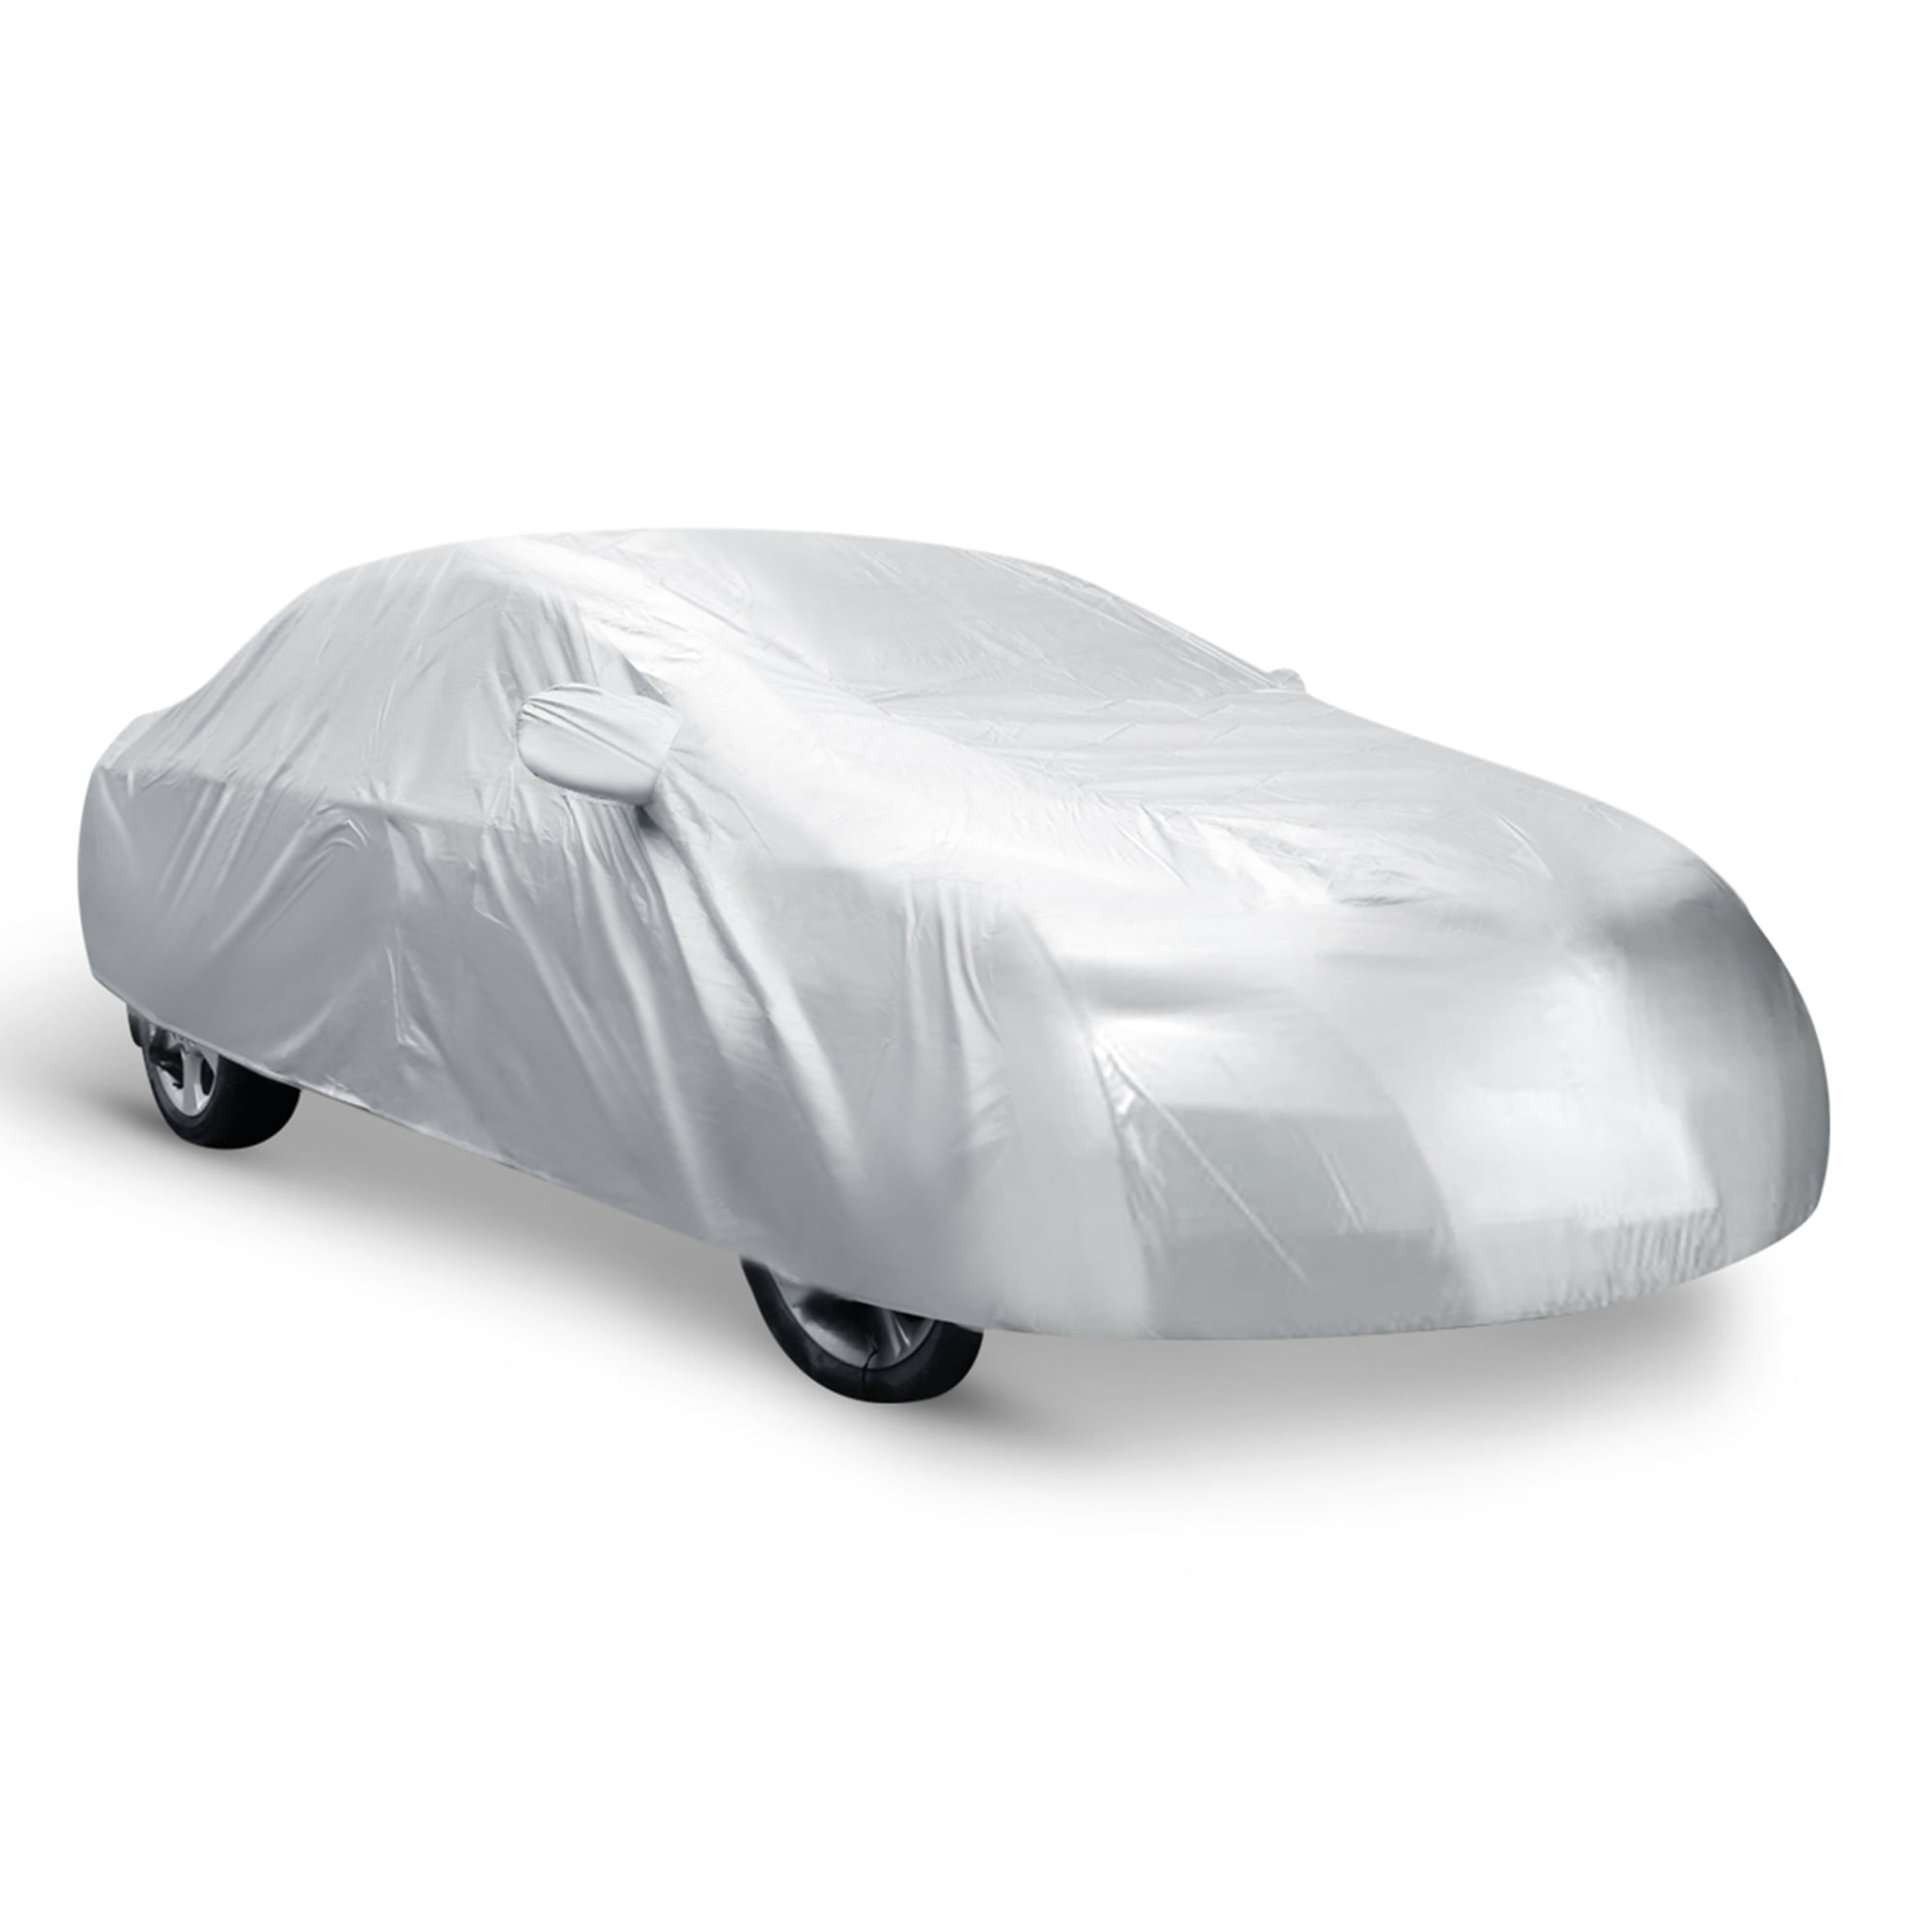 BREATHABLE CAR COVER W/MIRROR POCKET-GREY FOR 2018 2017 2016 2015 NISSAN MURANO 